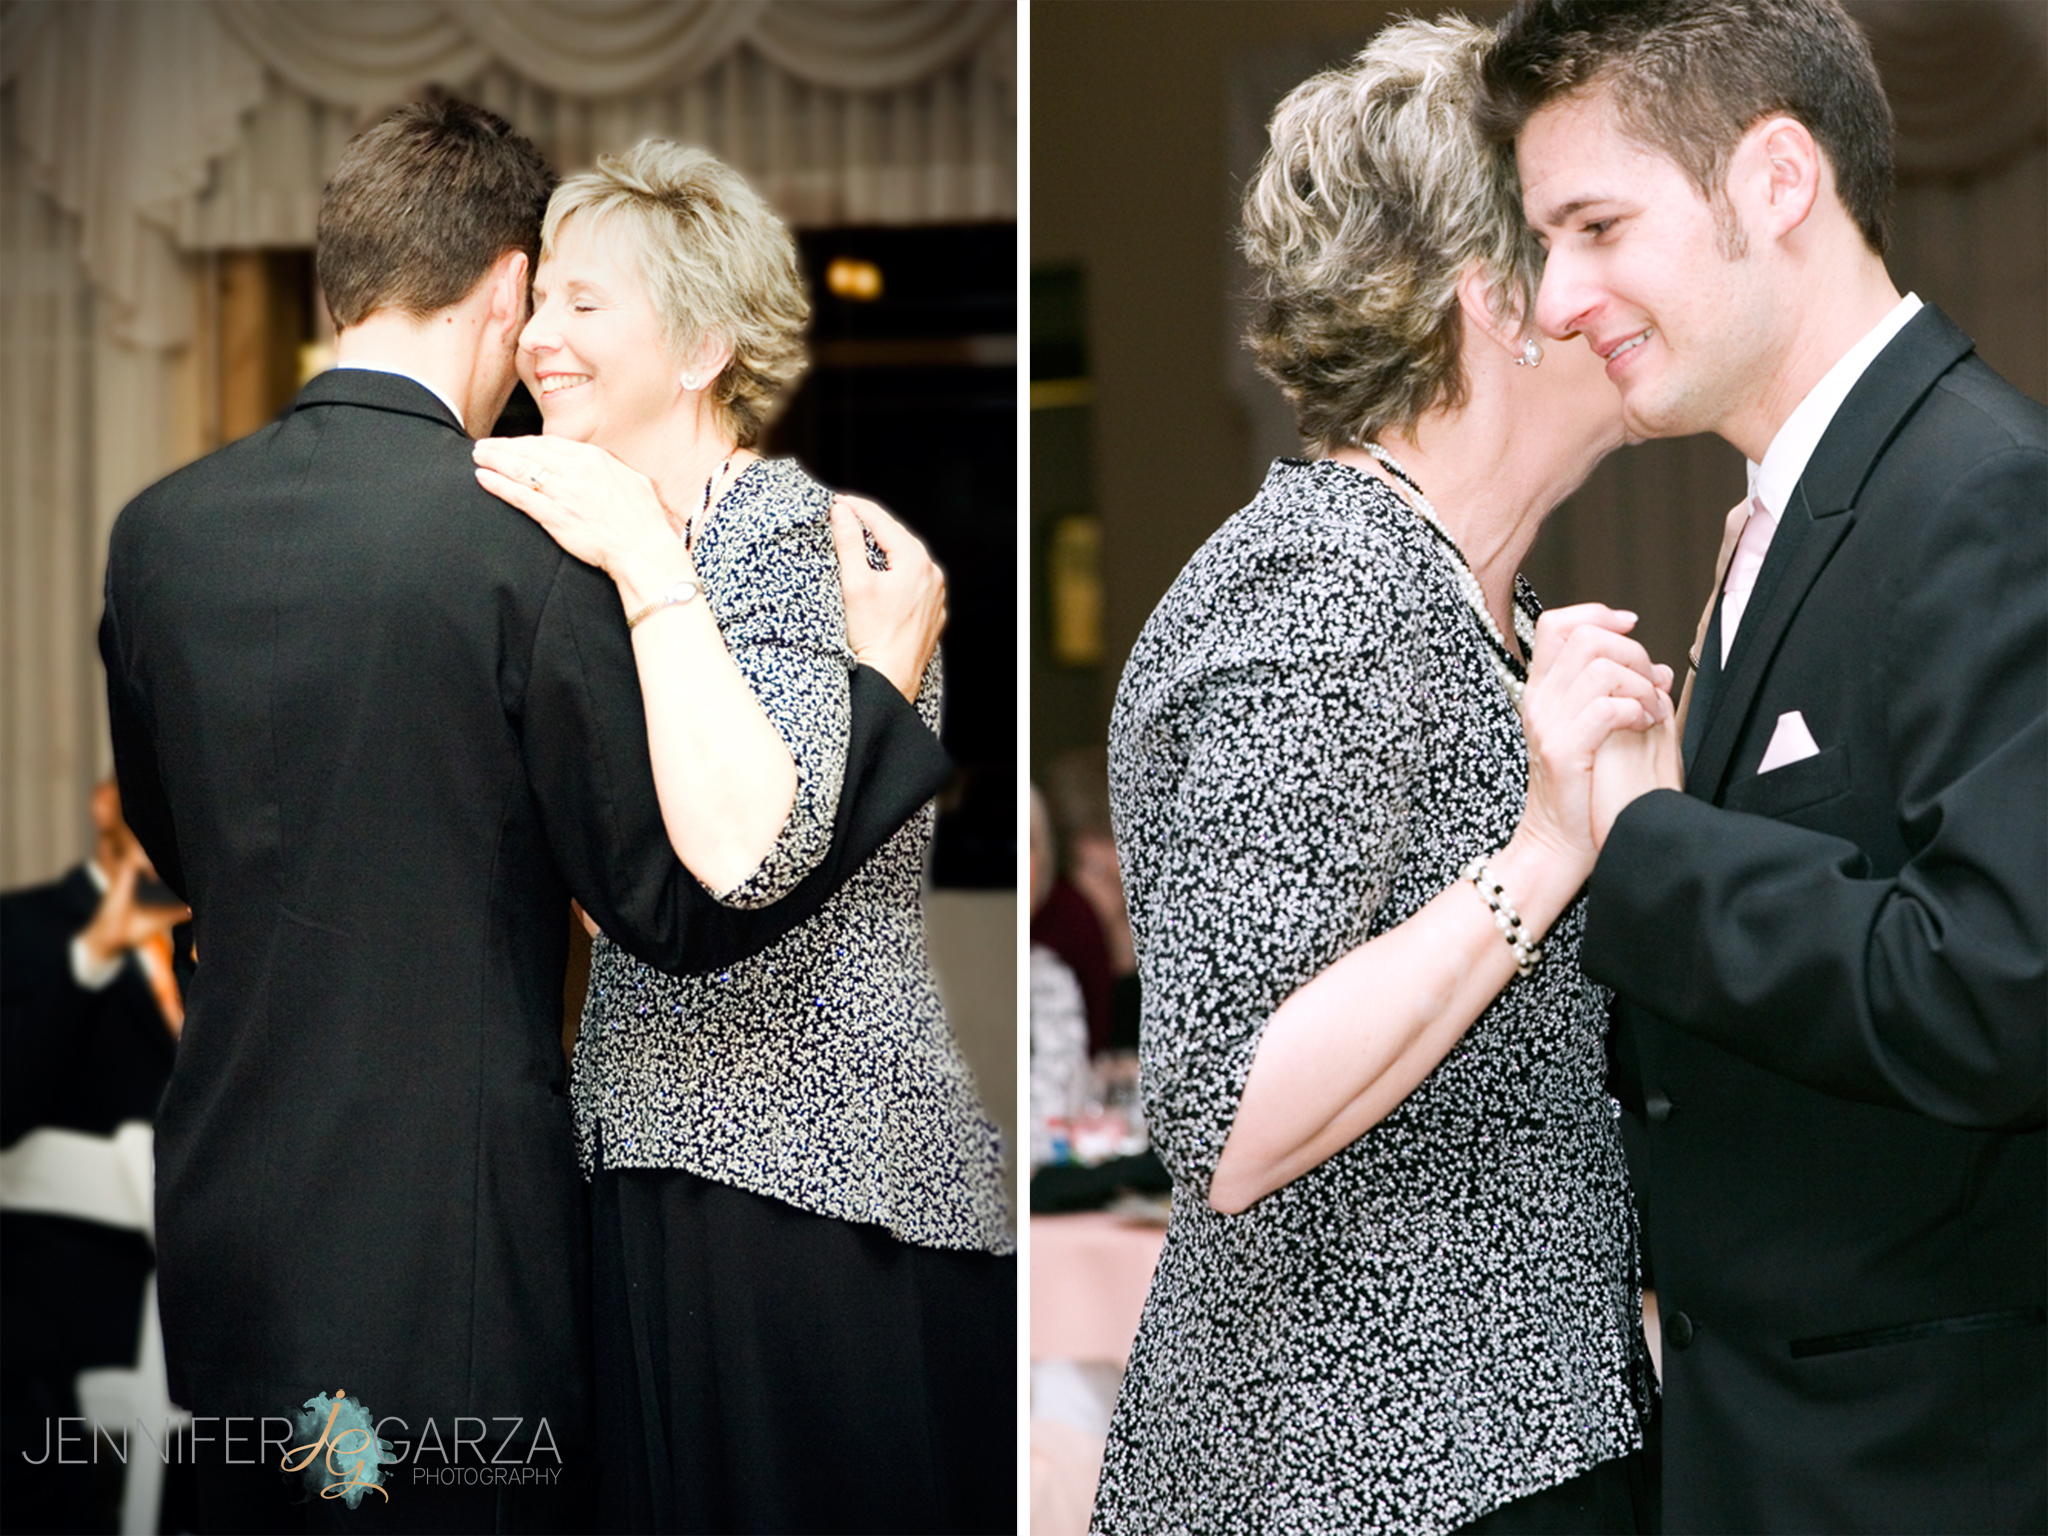 Mother Son dance during the wedding reception. Annie & Tom’s Stonebrook Manor Event Center Wedding by Colorado Wedding Photographer, Jennifer Garza. Colorado Wedding Photographer, Denver Wedding Photographer, Colorado Wedding Photos, Denver Wedding Photos, Colorado Bride, Denver Bride, Stonebrook Manor Wedding, Stonebrook Manor, Rocky Mountain Bride, Couture Colorado